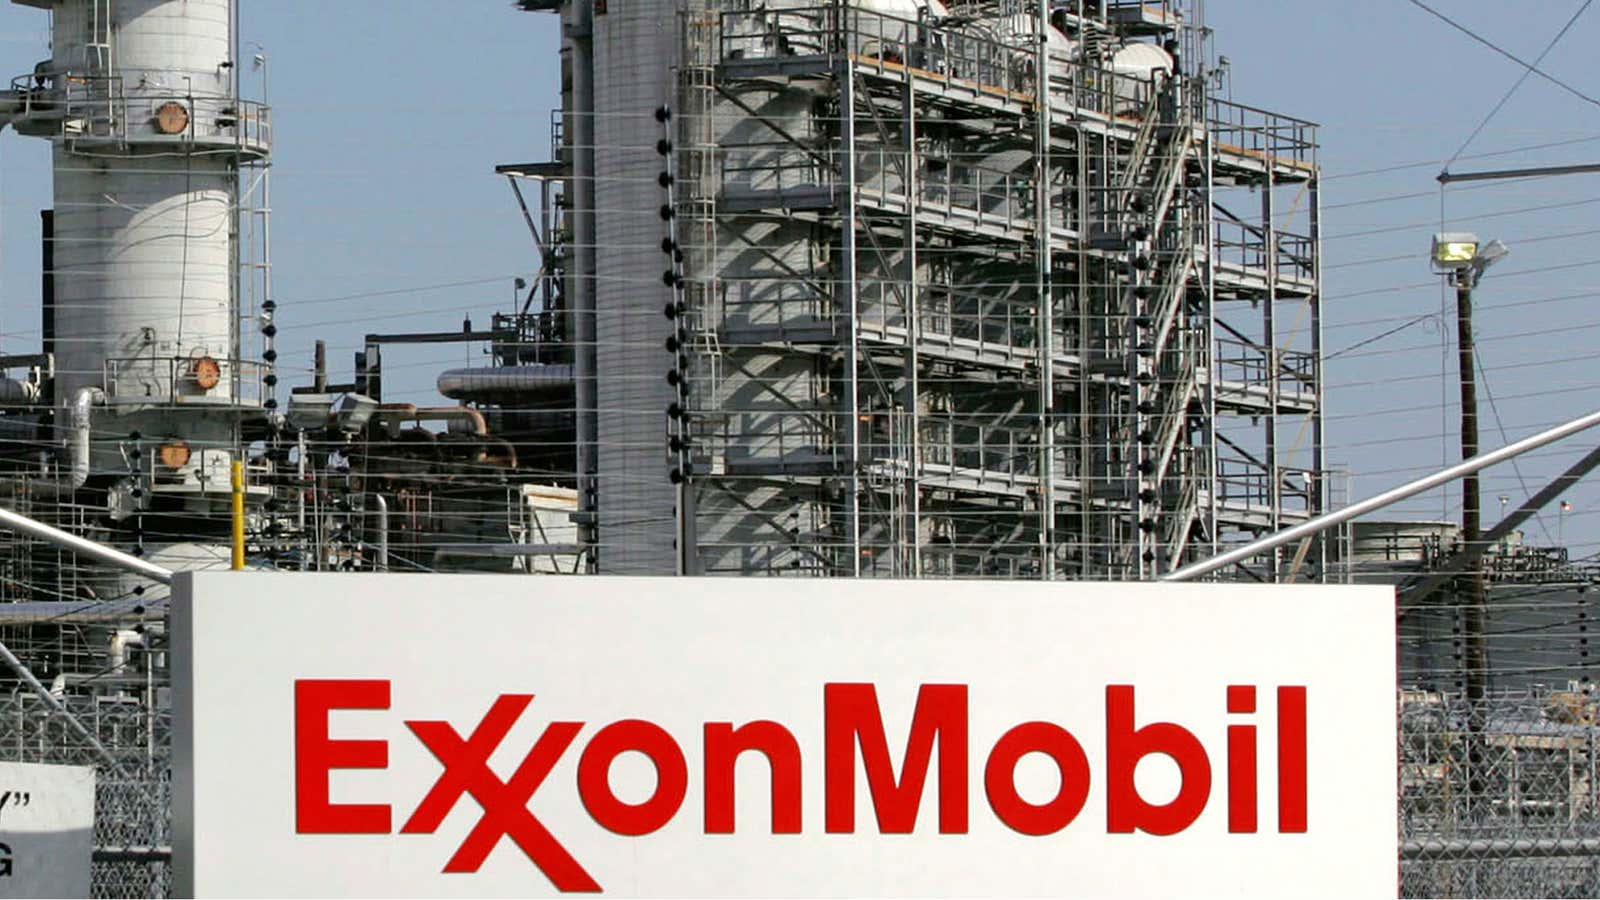 What did ExxonMobil know and when did it know it?